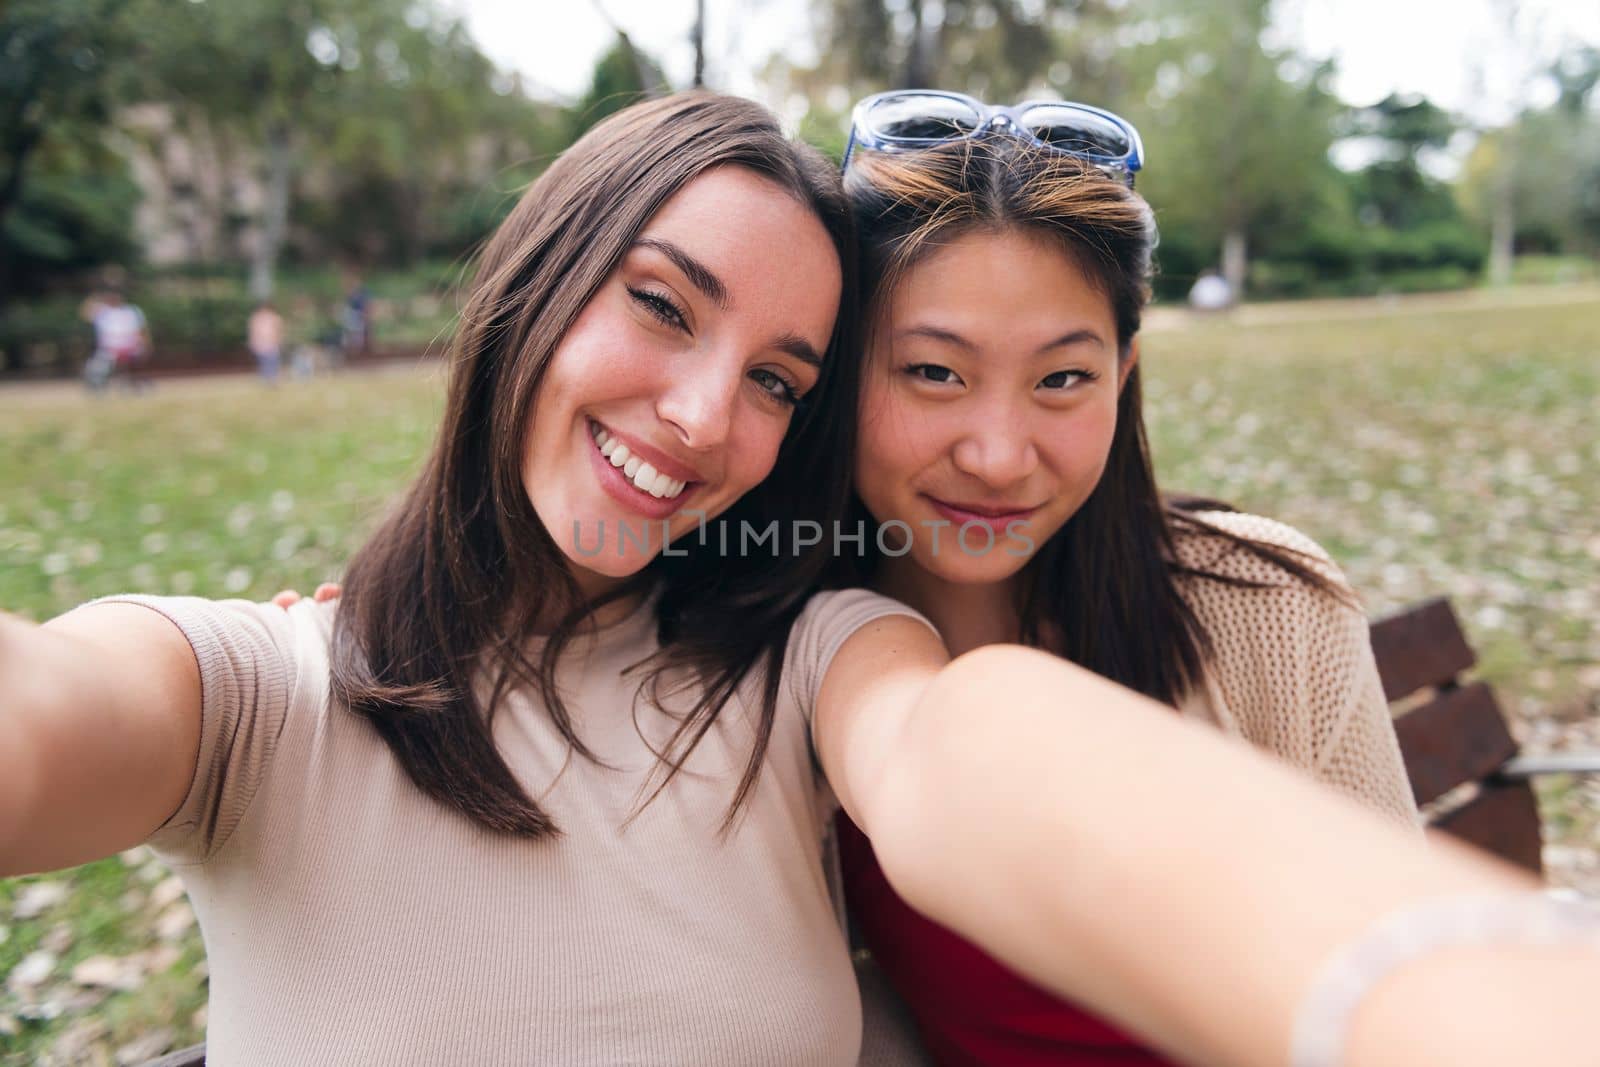 selfie photo of two happy young women at park by raulmelldo